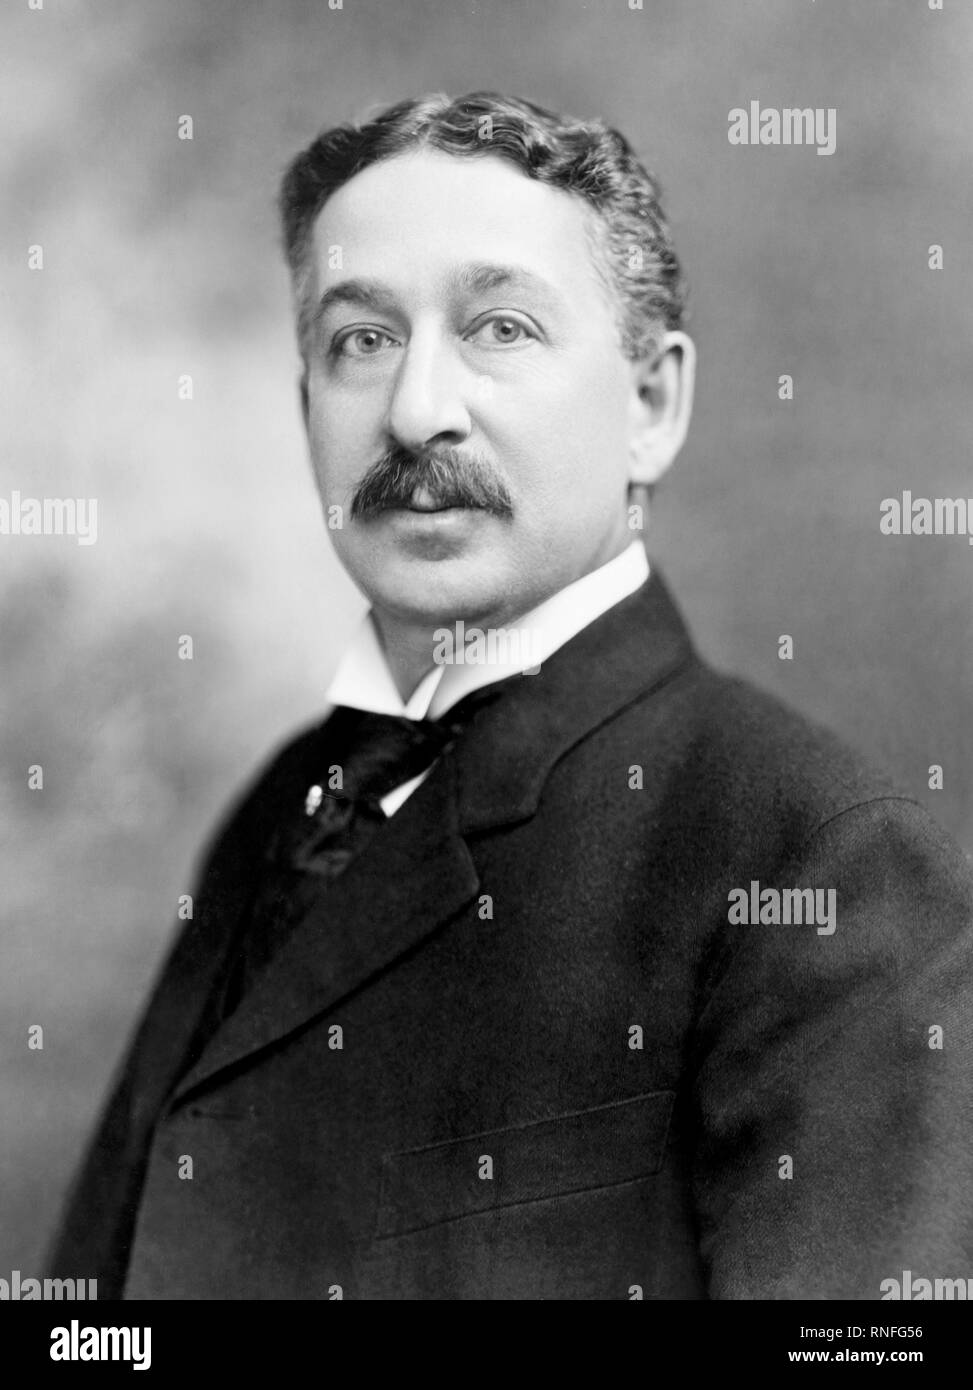 King C Gillette circa 1906 american businessman and invented a version of the safety razor. King Camp Gillette formed the gillette safety razor company Stock Photo